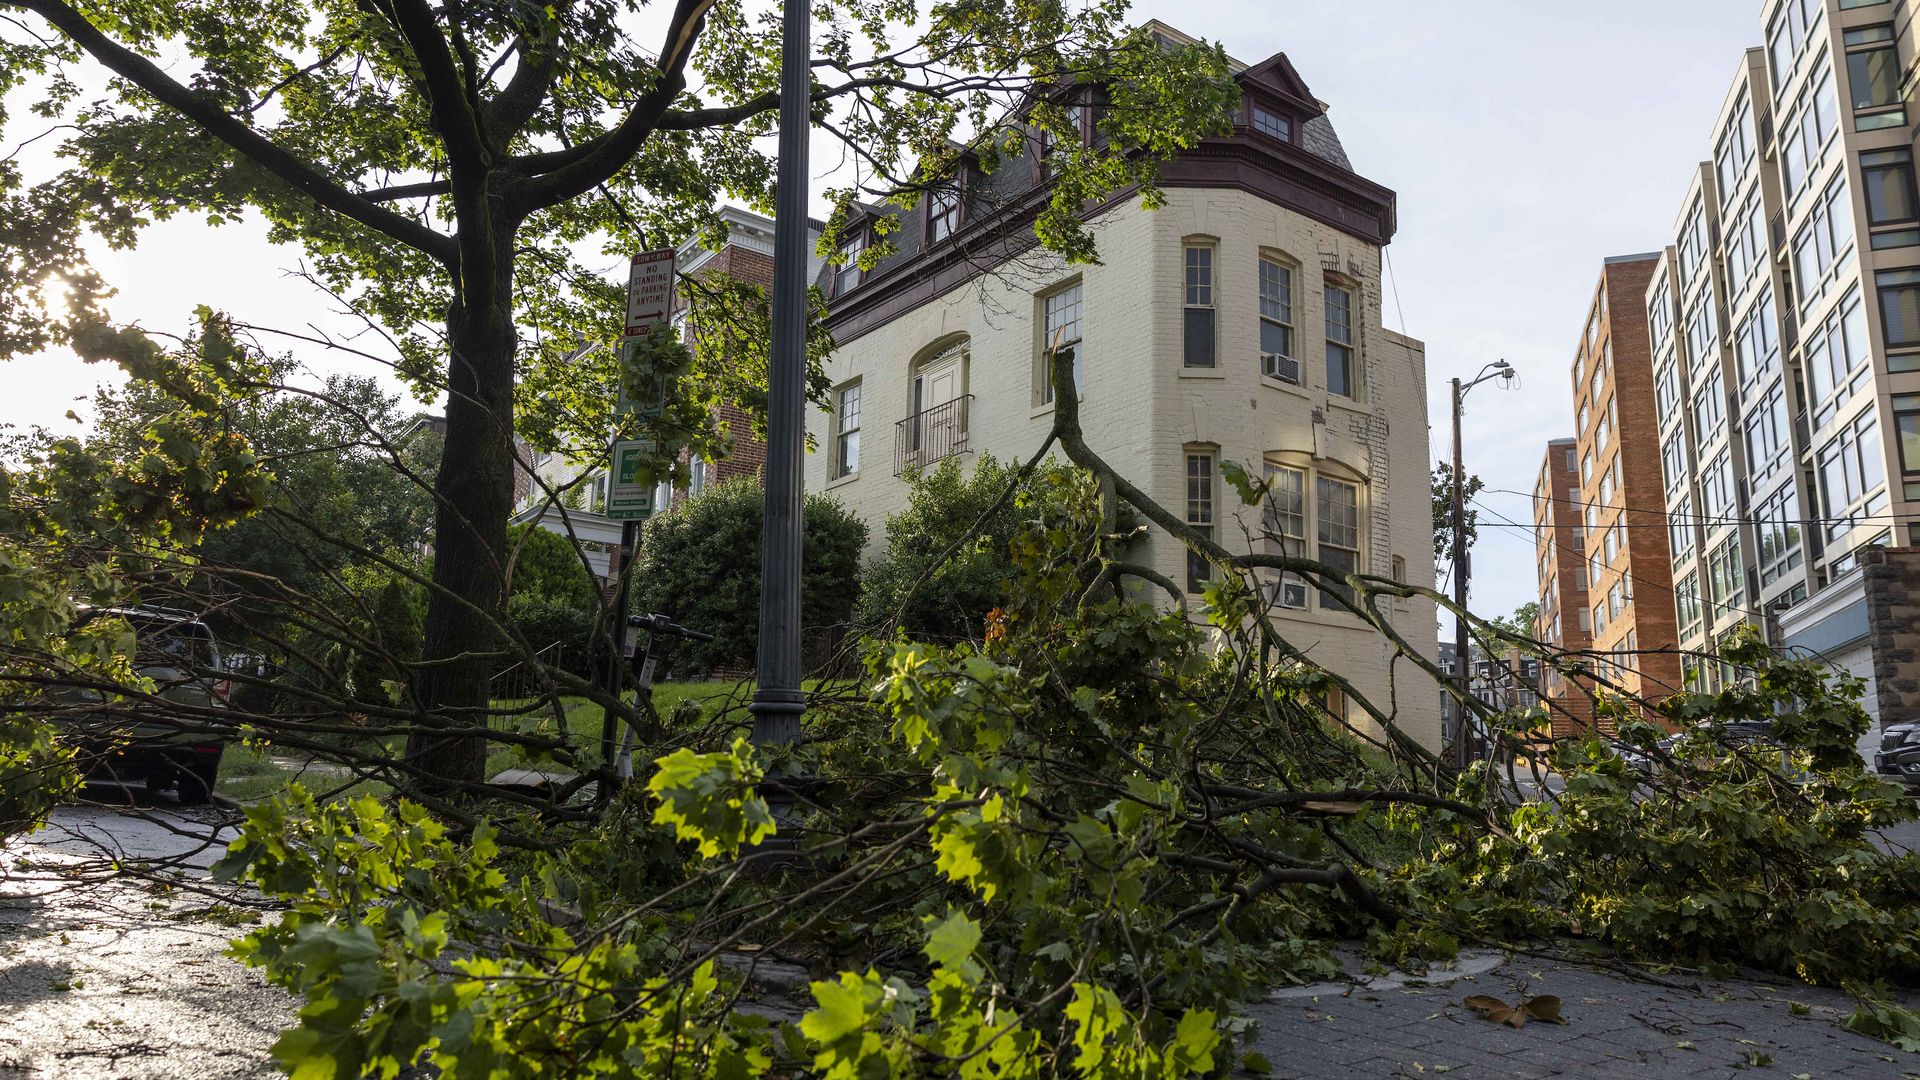  Tree branches littered the Woodley Park neighborhood following a storm in Washington, D.C